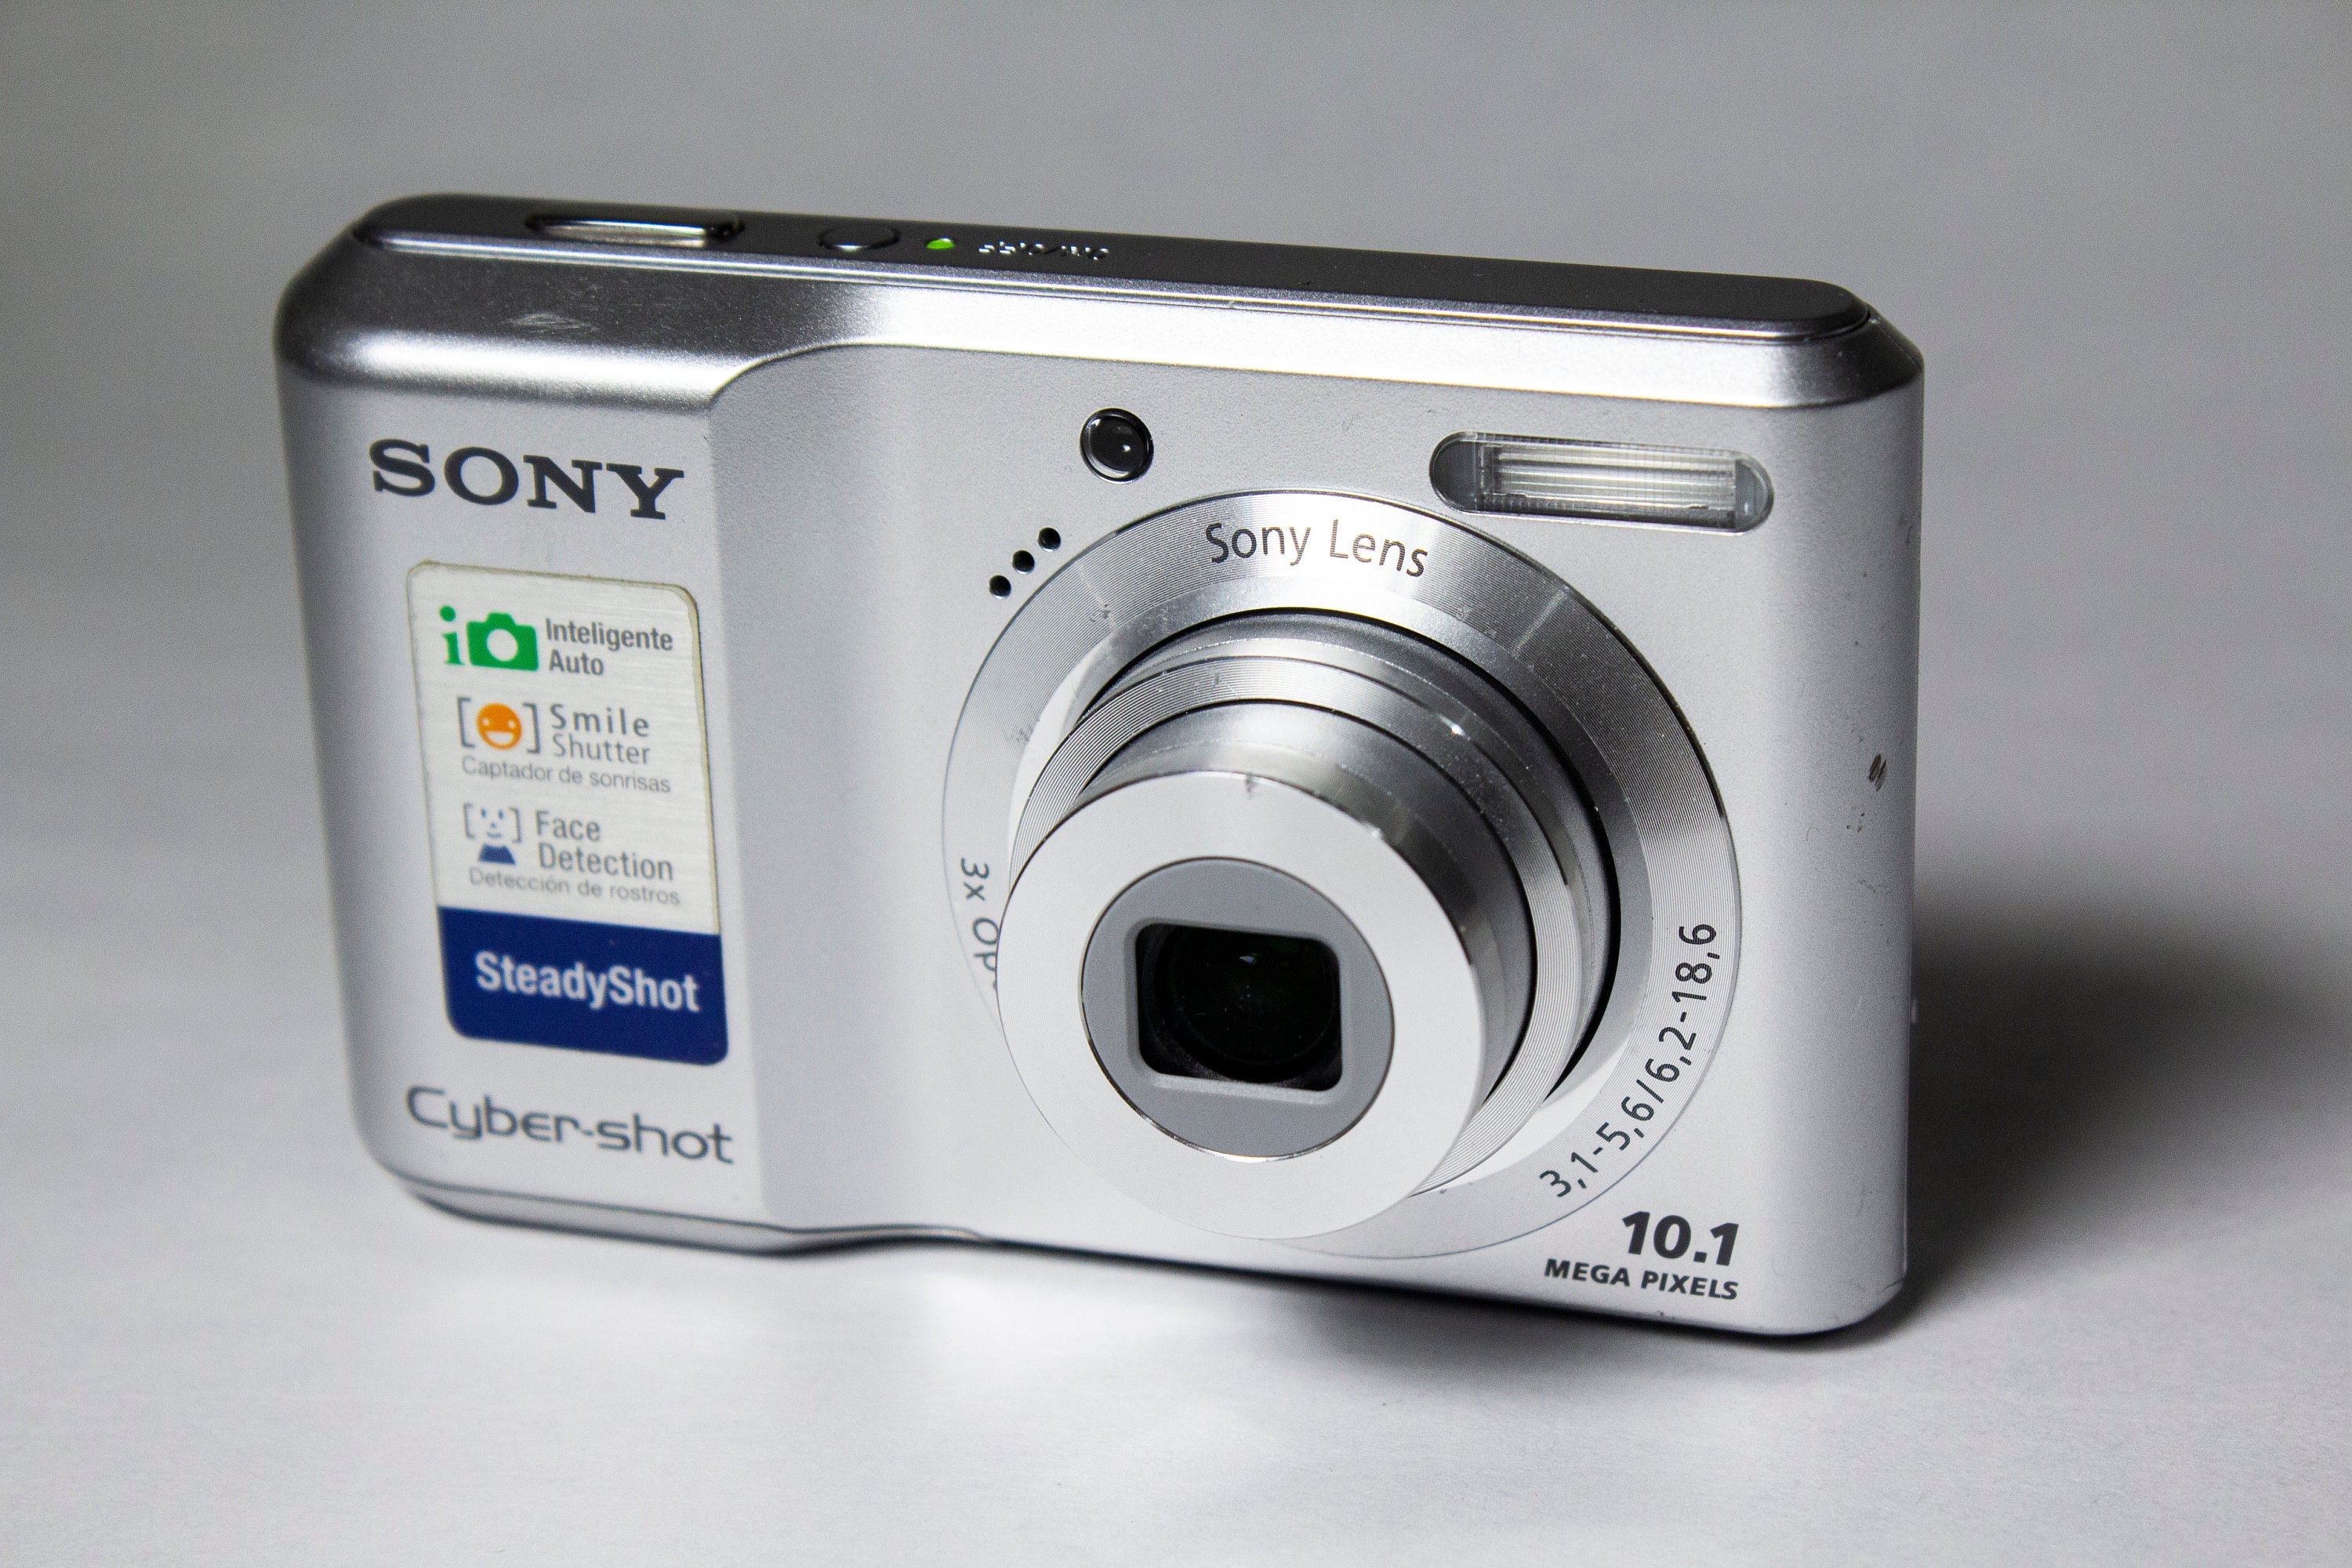  Sony Cybershot DSC-T10 7.2MP Digital Camera with 3x Optical  Steady Shot Zoom (Silver) : Point And Shoot Digital Cameras : Electronics